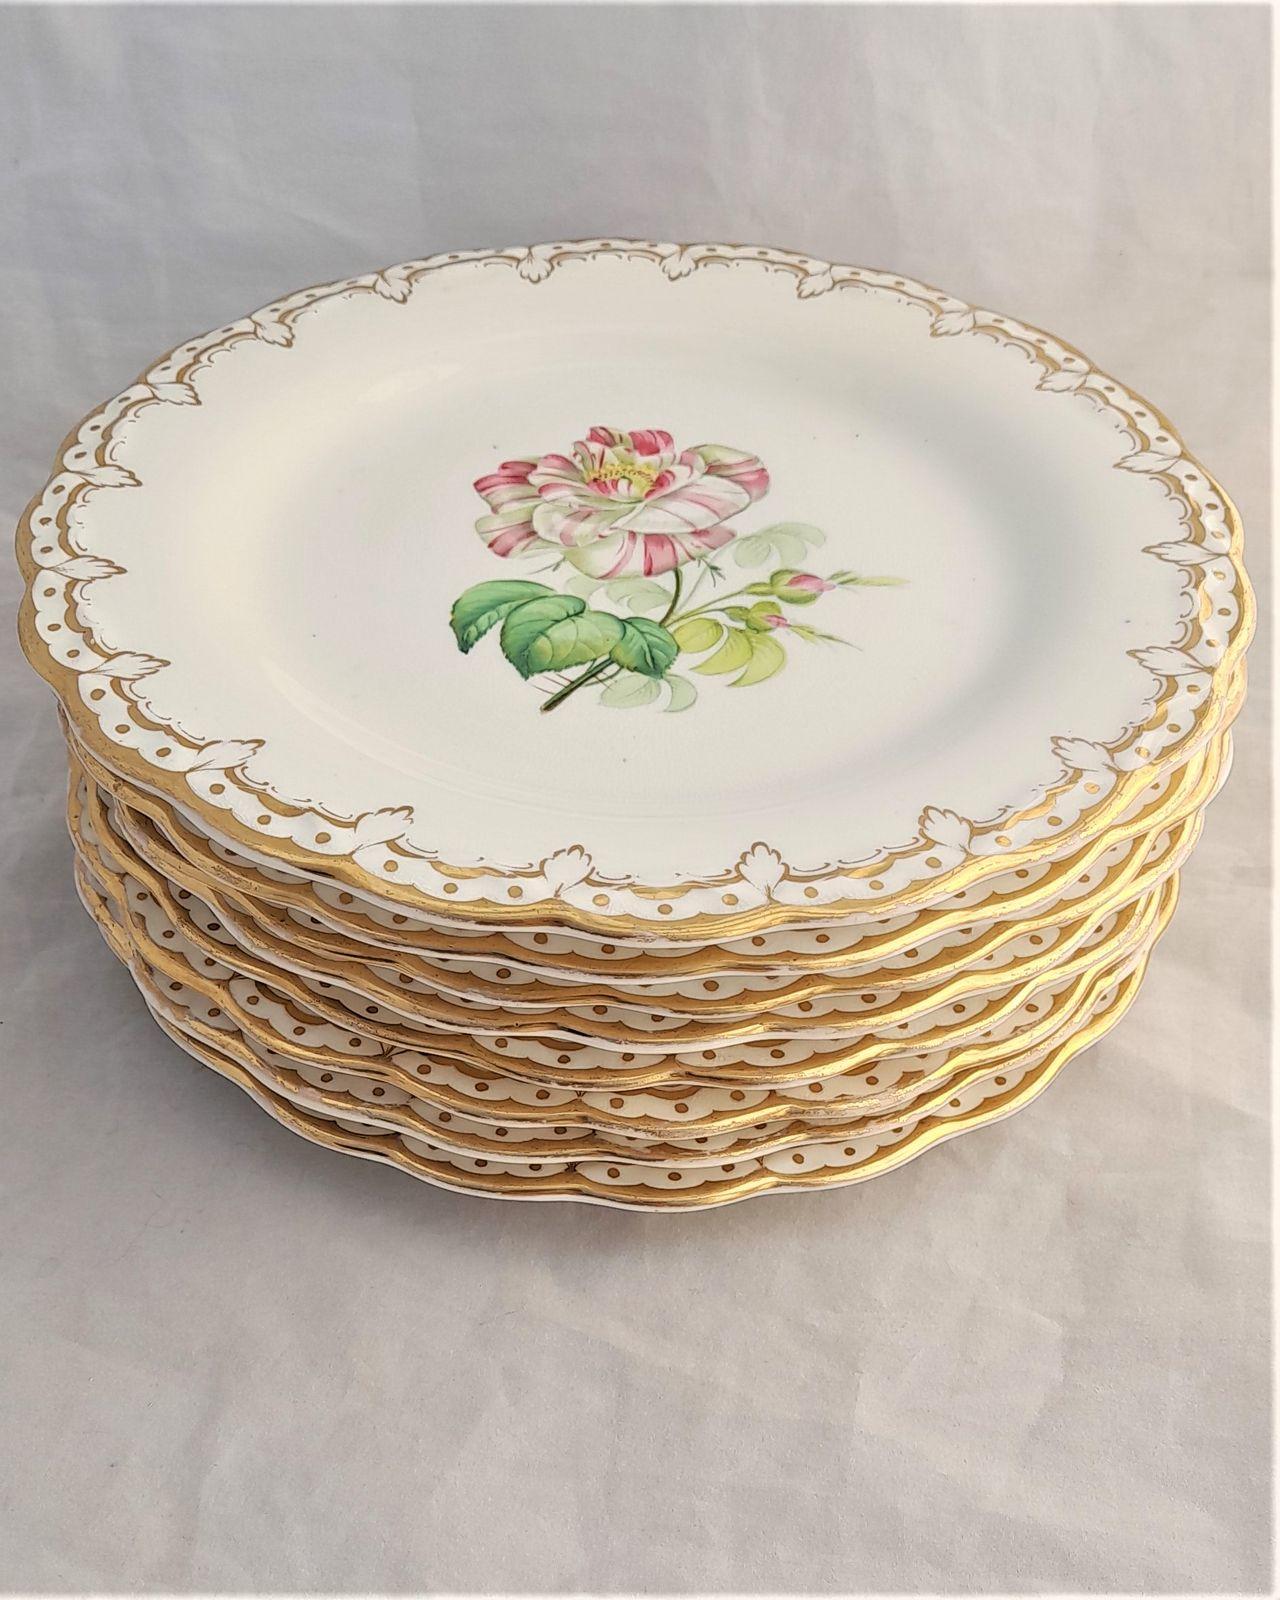 A decorative set of eight antique porcelain botanical dessert plates each hand painted with different flowers, scalloped rim with gilt leaf shaped border pattern Victorian circa 1850 iron red hand painted pattern number 1060. 22 cm diameter 2.2 cm high. The eight plates weigh 2.9 kgs unpacked.